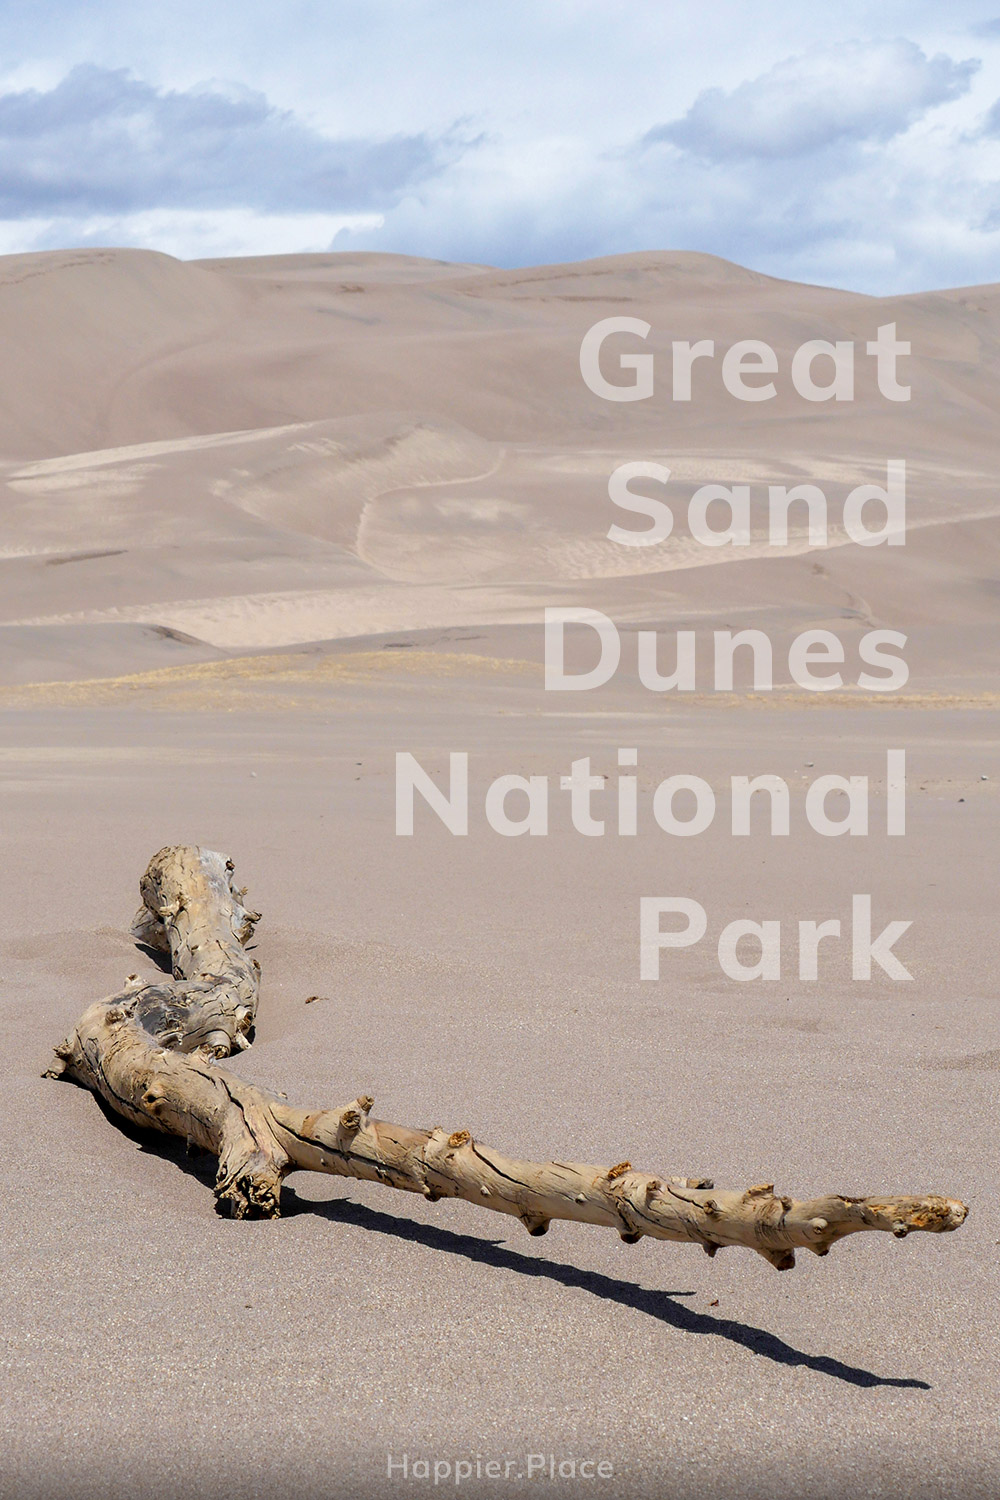 Great Sand Dunes National Park, dead tree in the desert, Colorado, HappierPlace